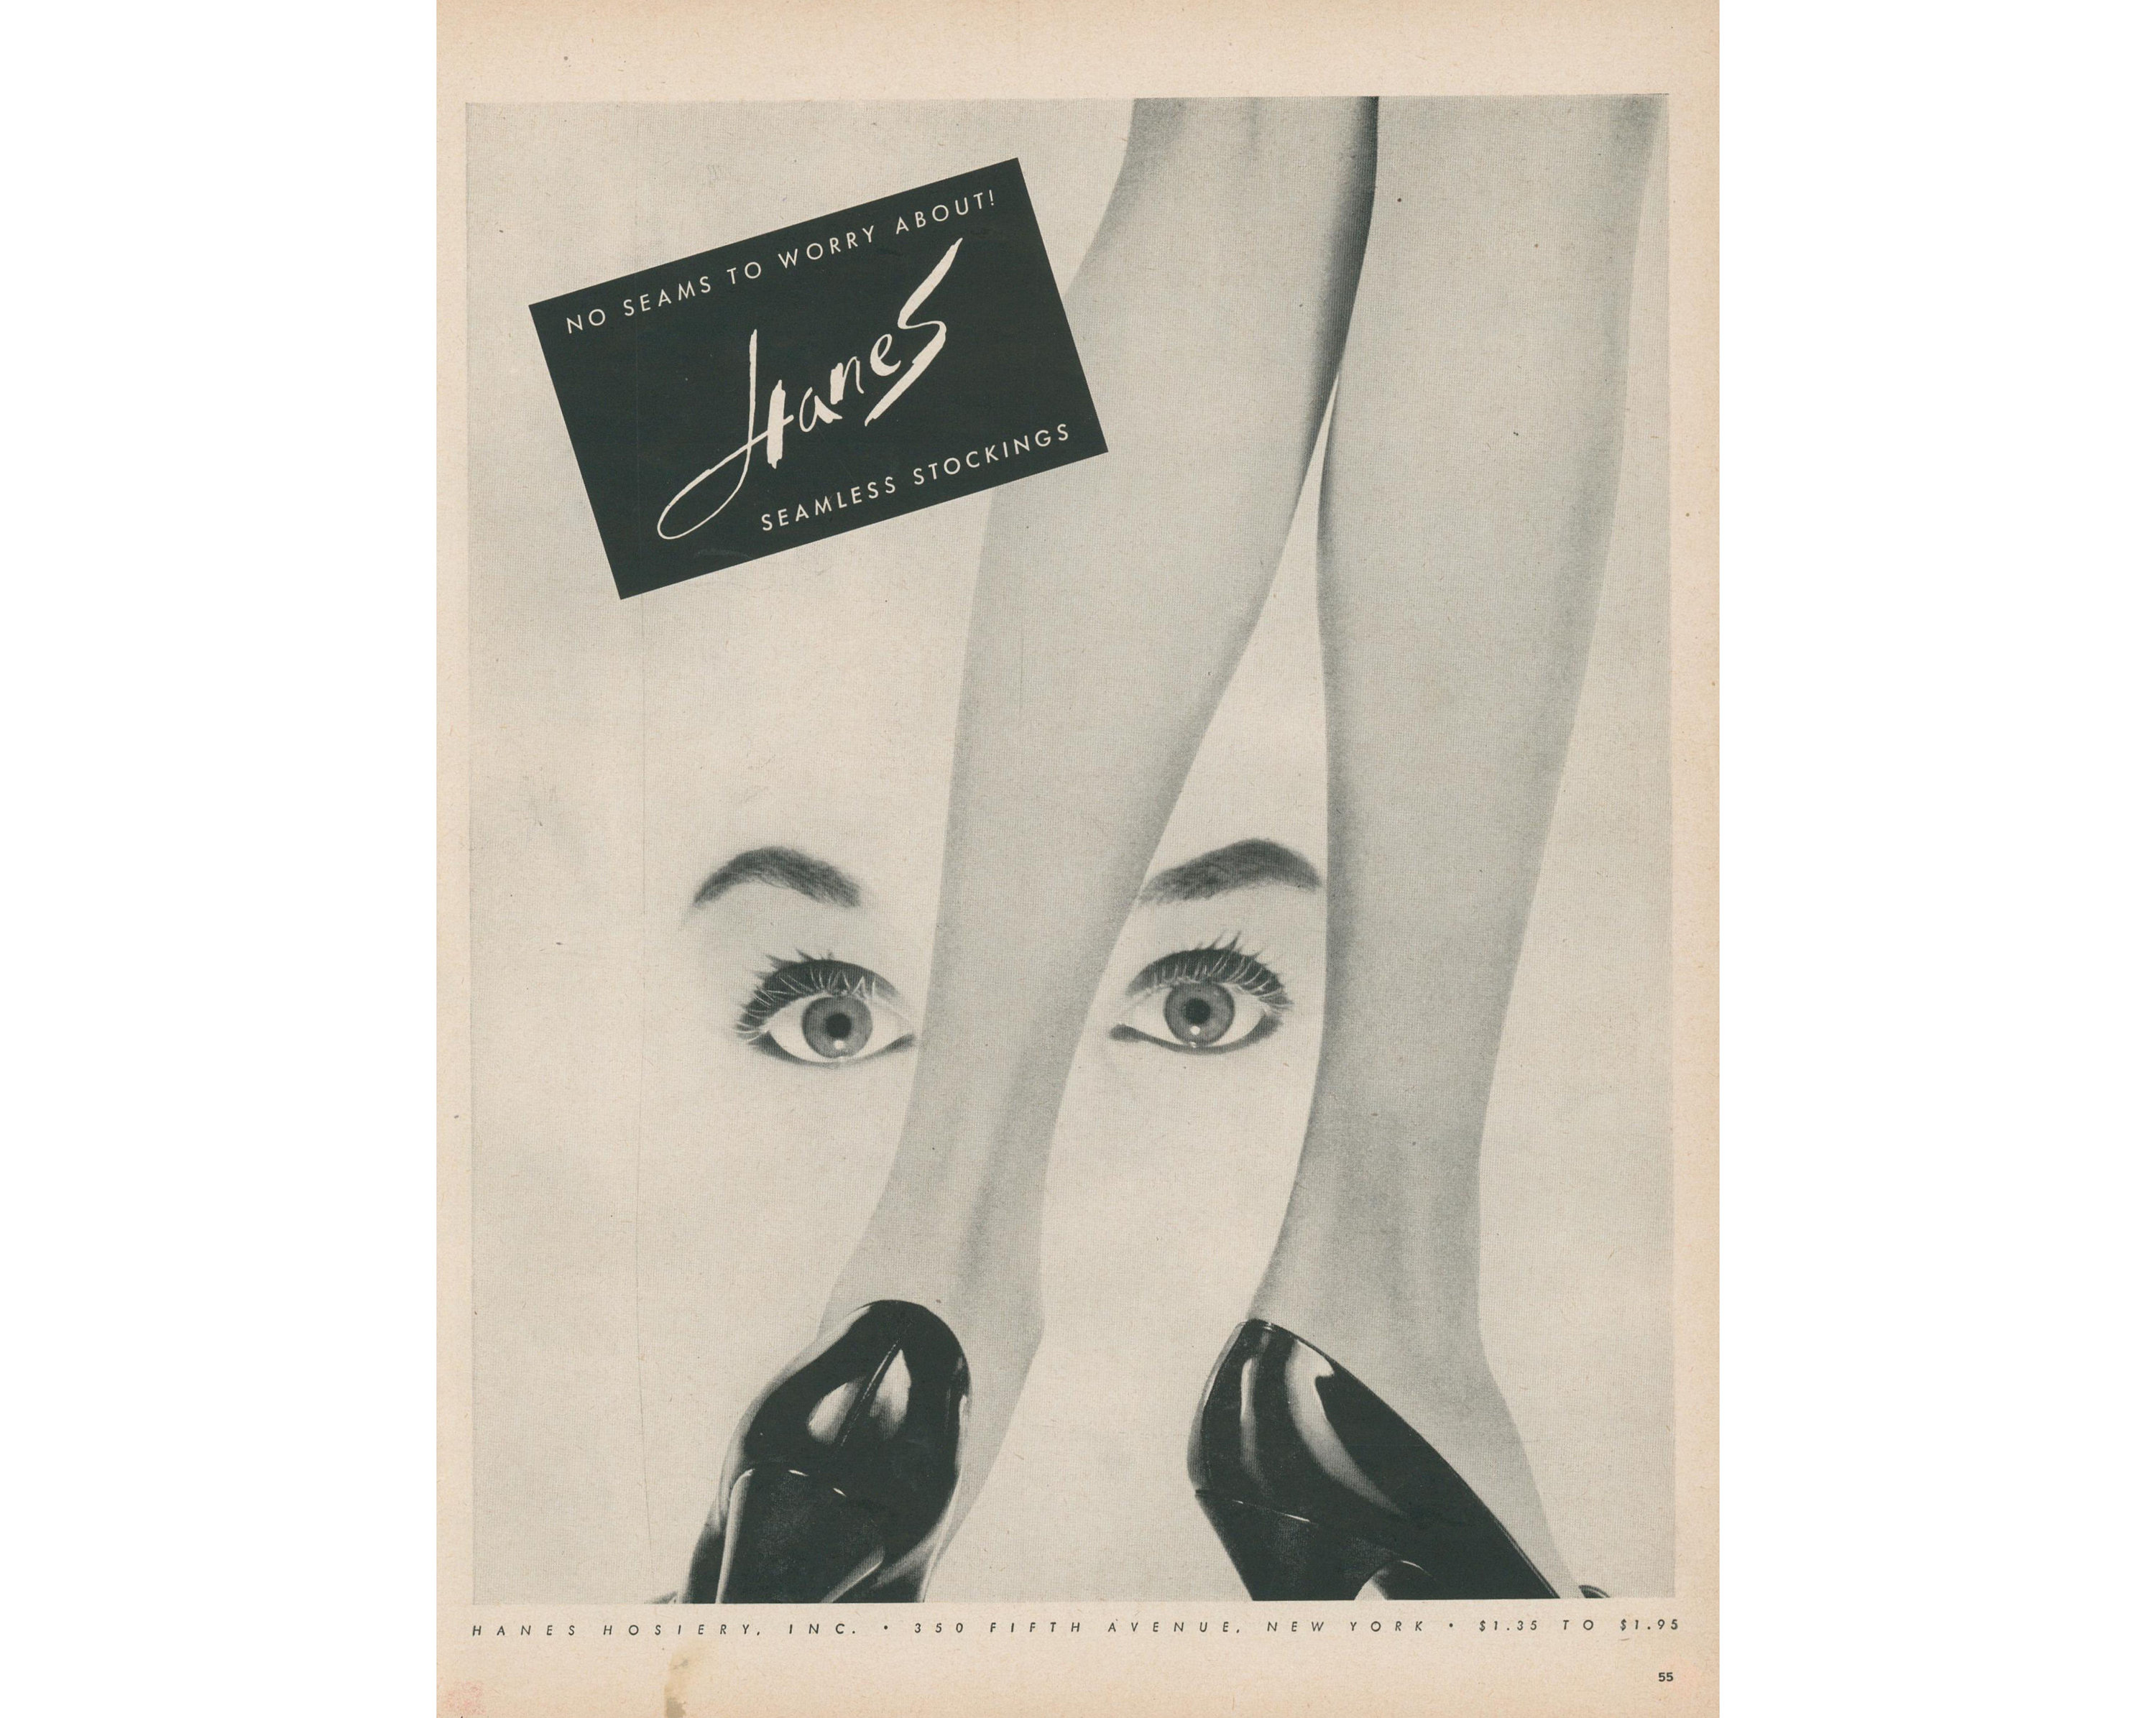 Designed for sheer beauty: Hanes Seamless Stockings ad 1945 by Bobri